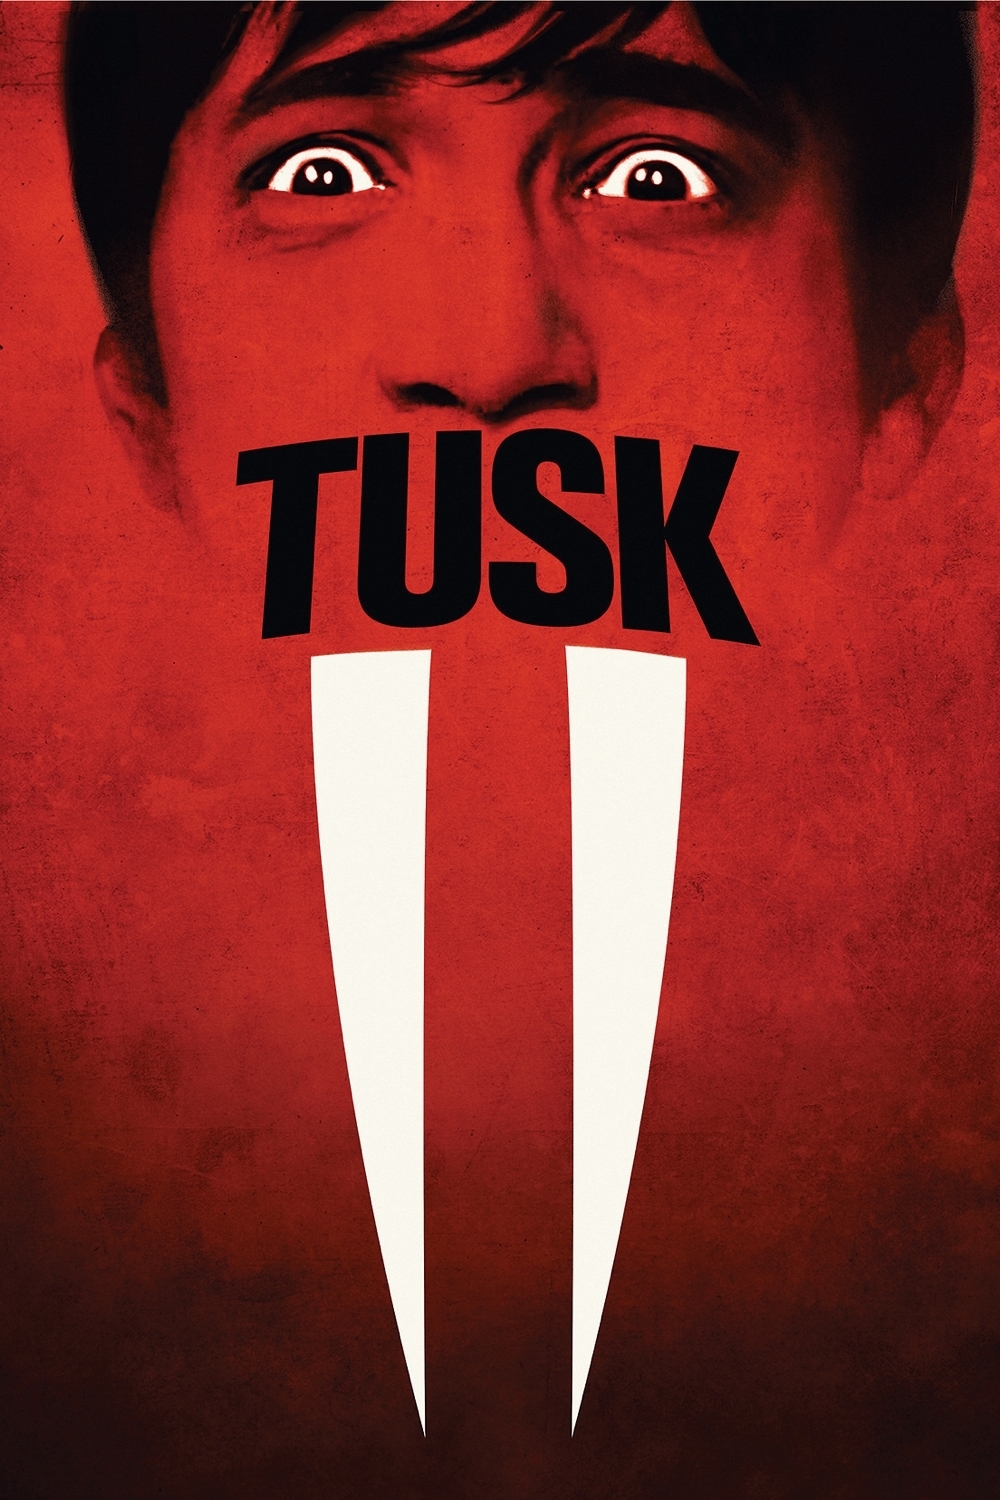 Poster for the movie "Tusk"